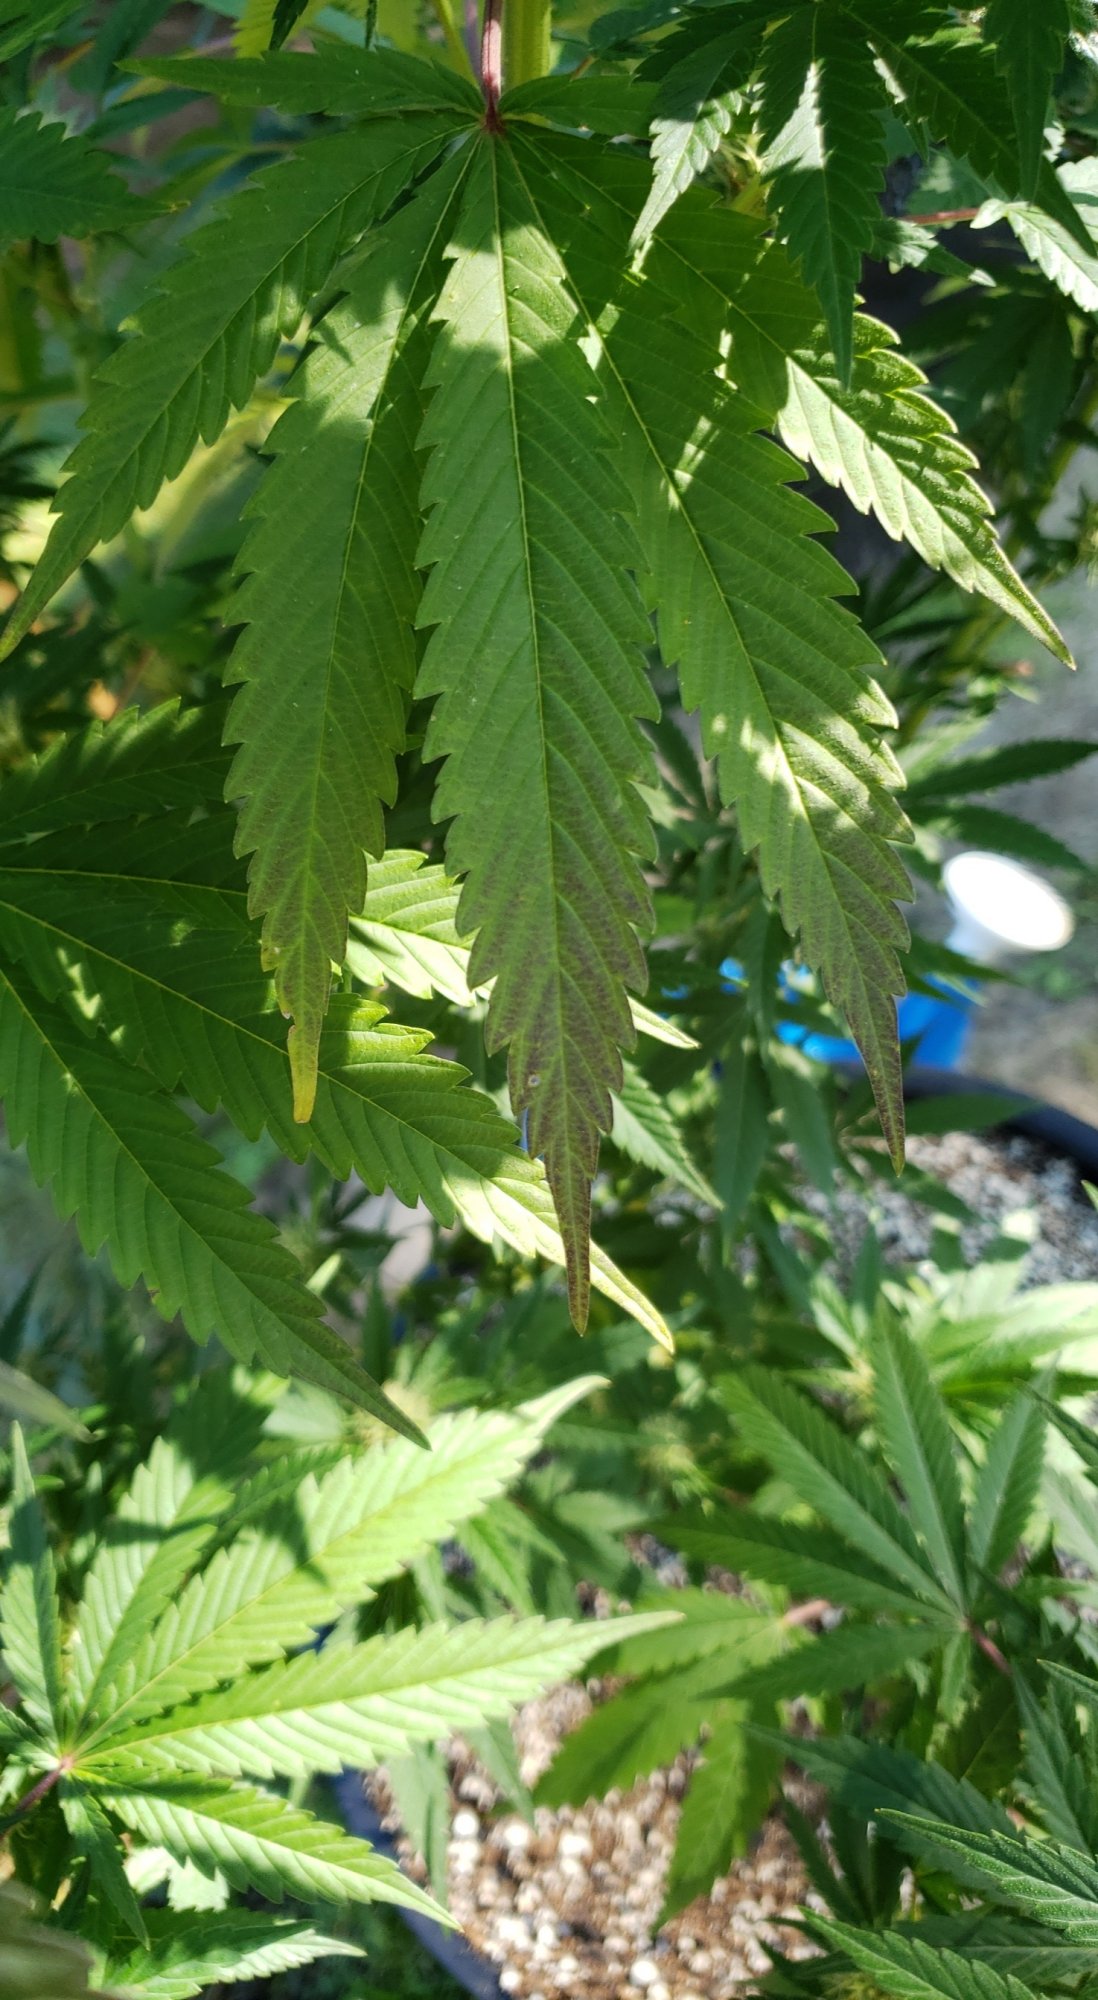 Whats wrong with these leaves 3